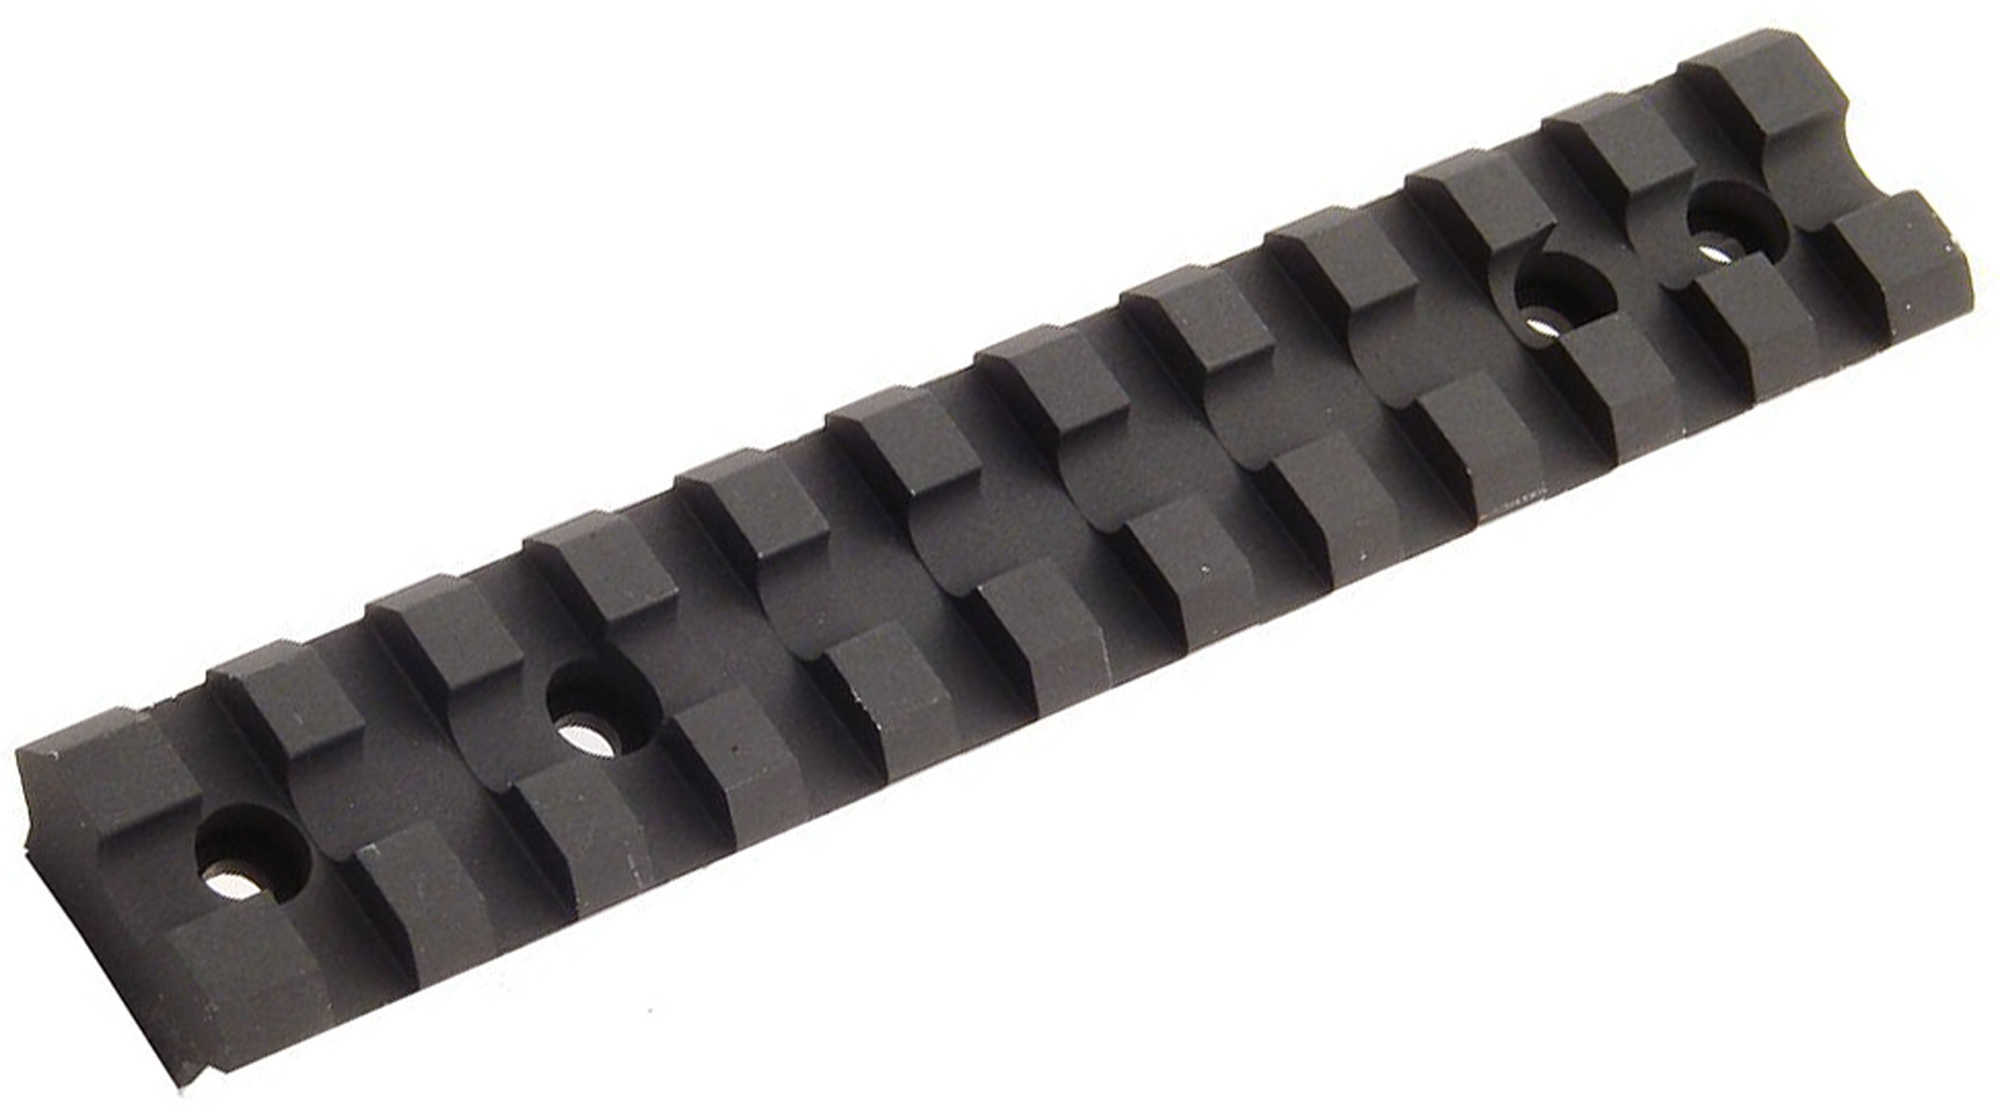 Leapers UTG LowProfile Rail Mount For Ruger 10/22 Md: MNT-22TOWL